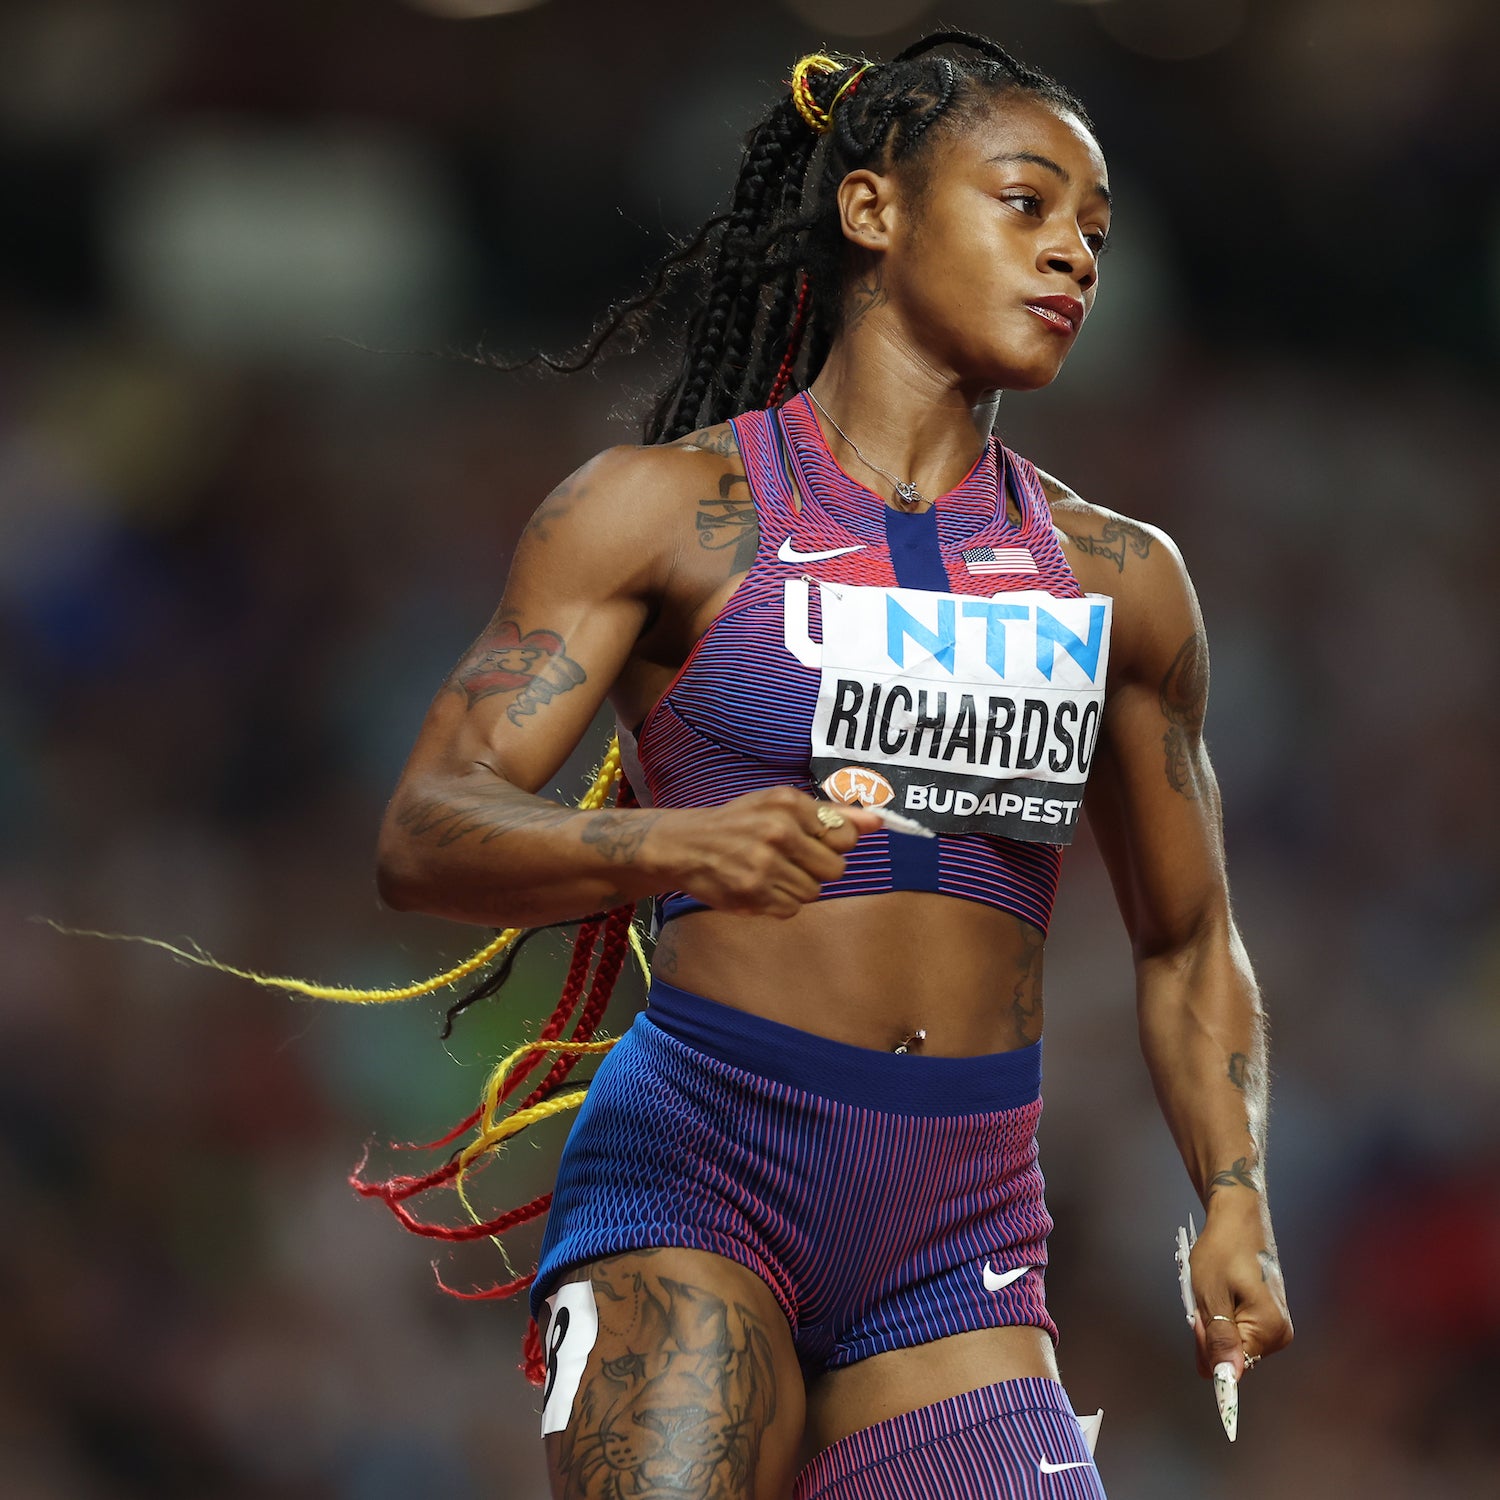 4 Stunning Moments So Far at the World Track and Field Championships